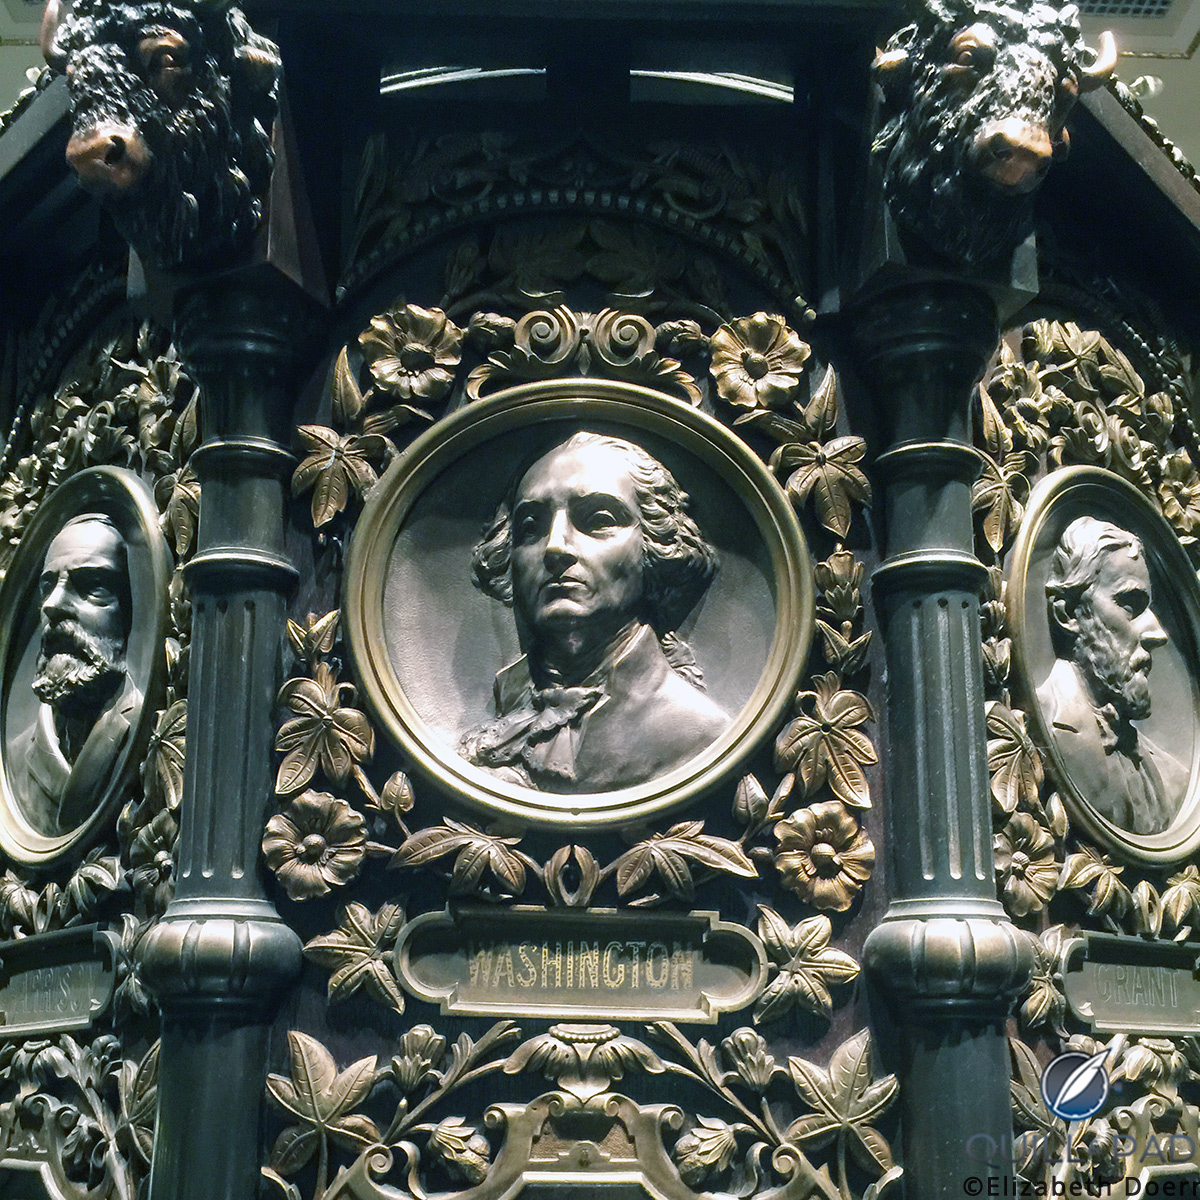 Bas-relief bust of George Washington on the clock in the Waldorf Astoria hotel, New York